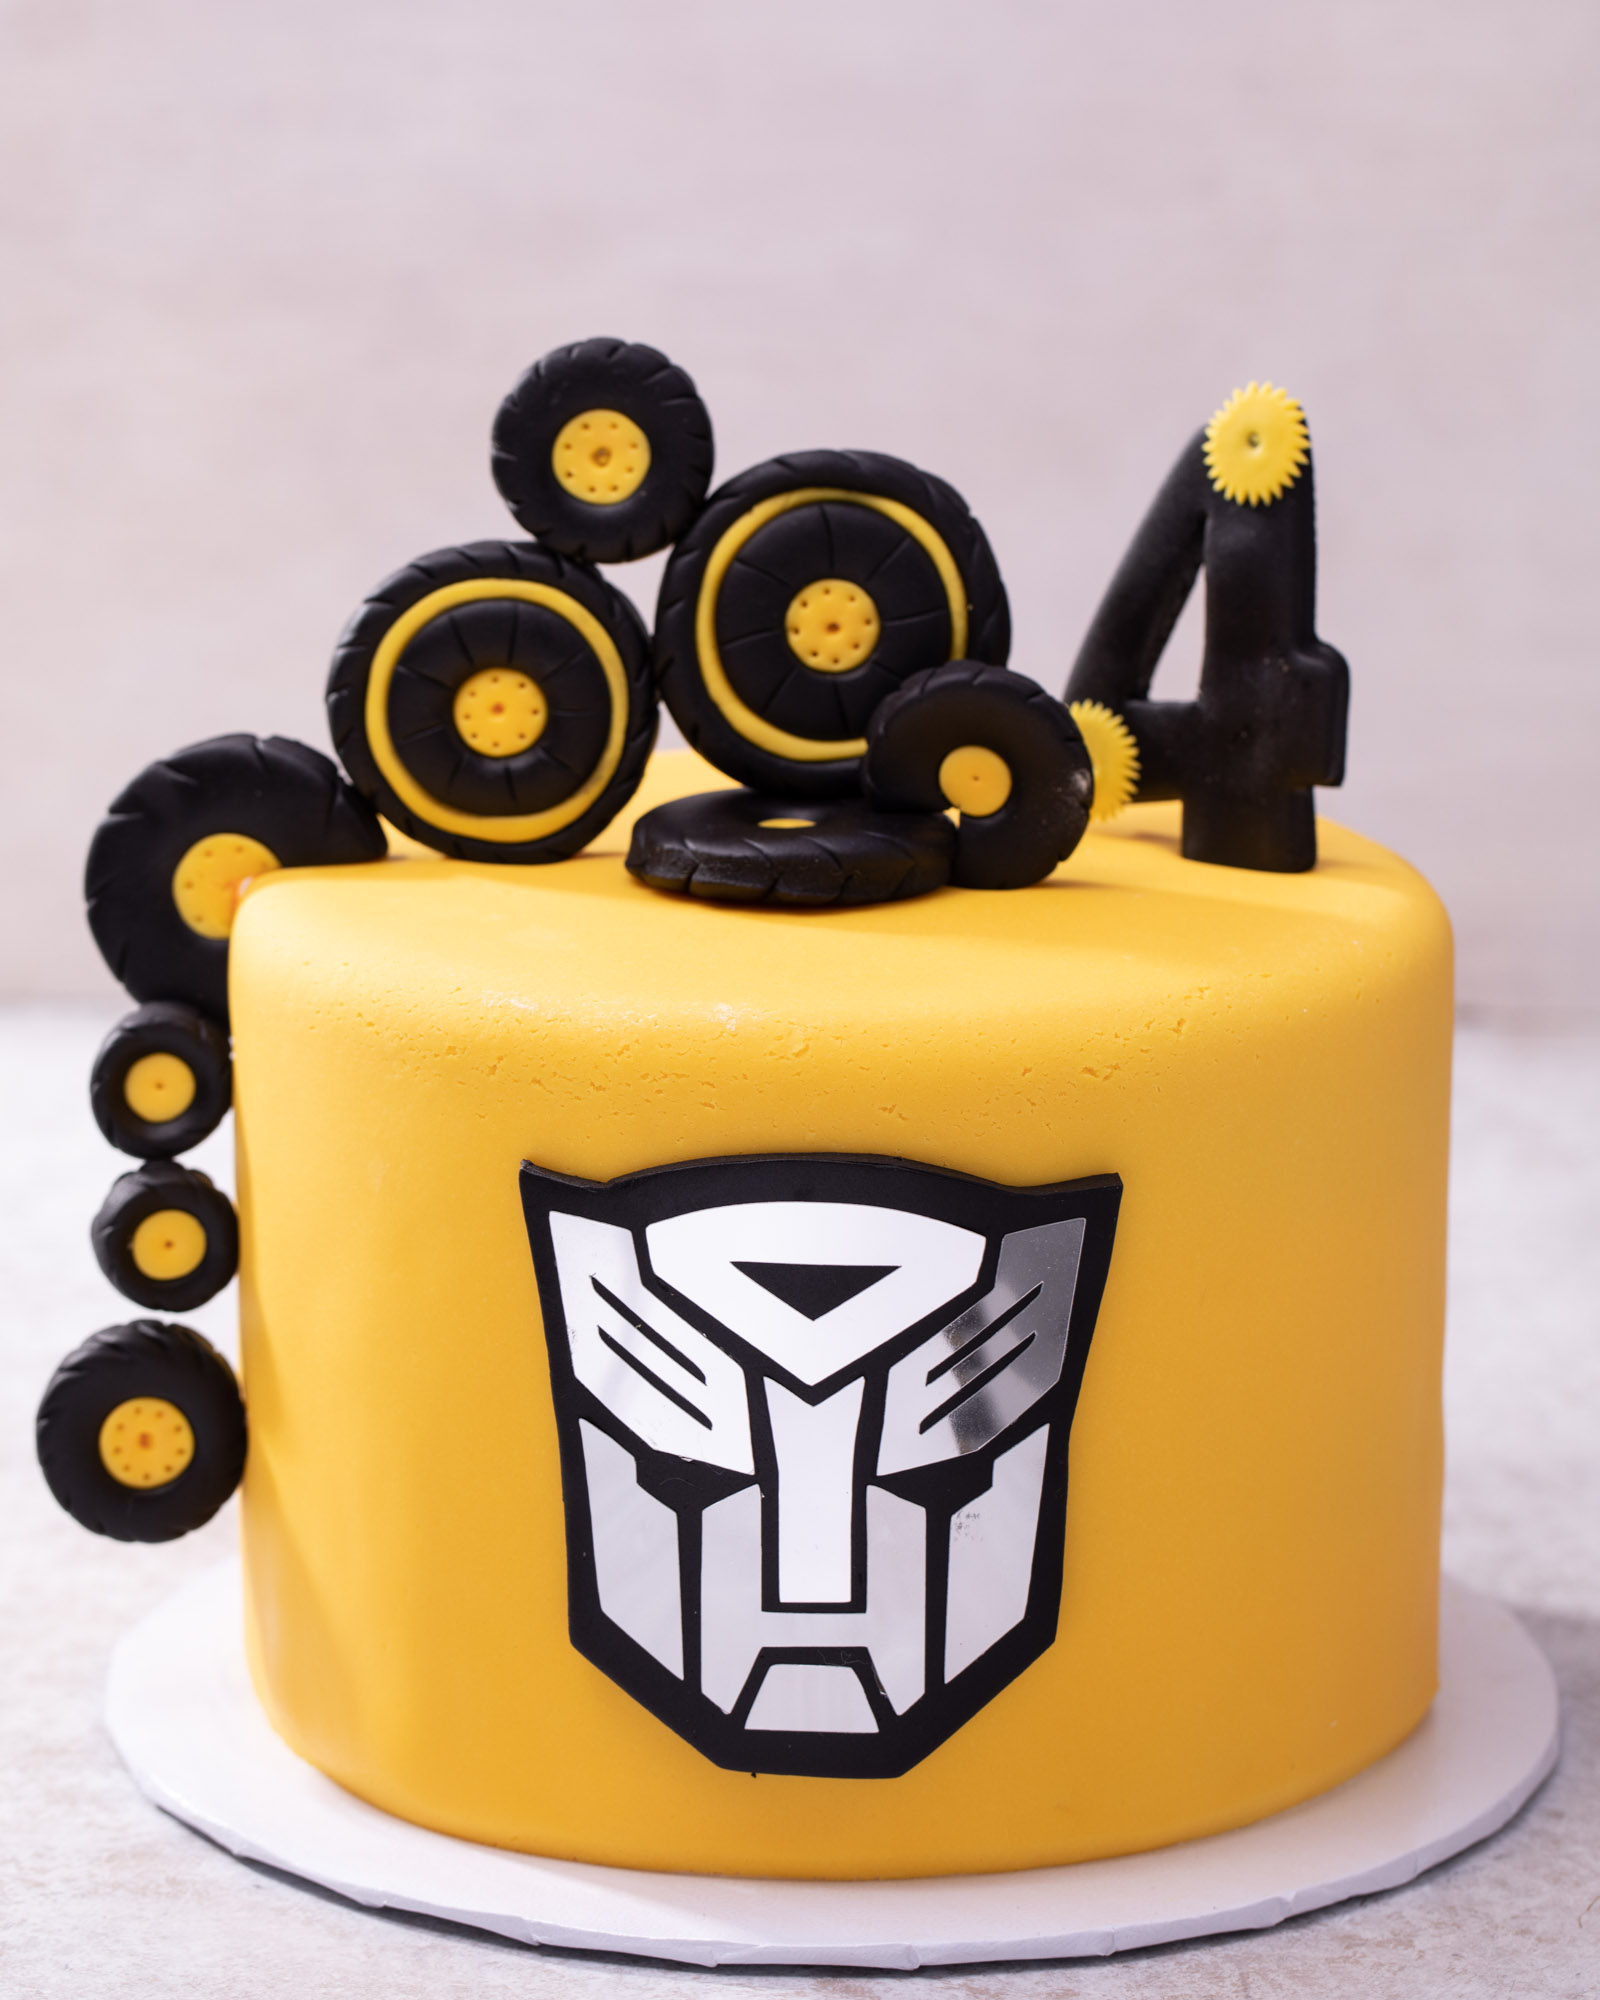 BumbleBee Transformers - Decorated Cake by Sugar Sweet - CakesDecor